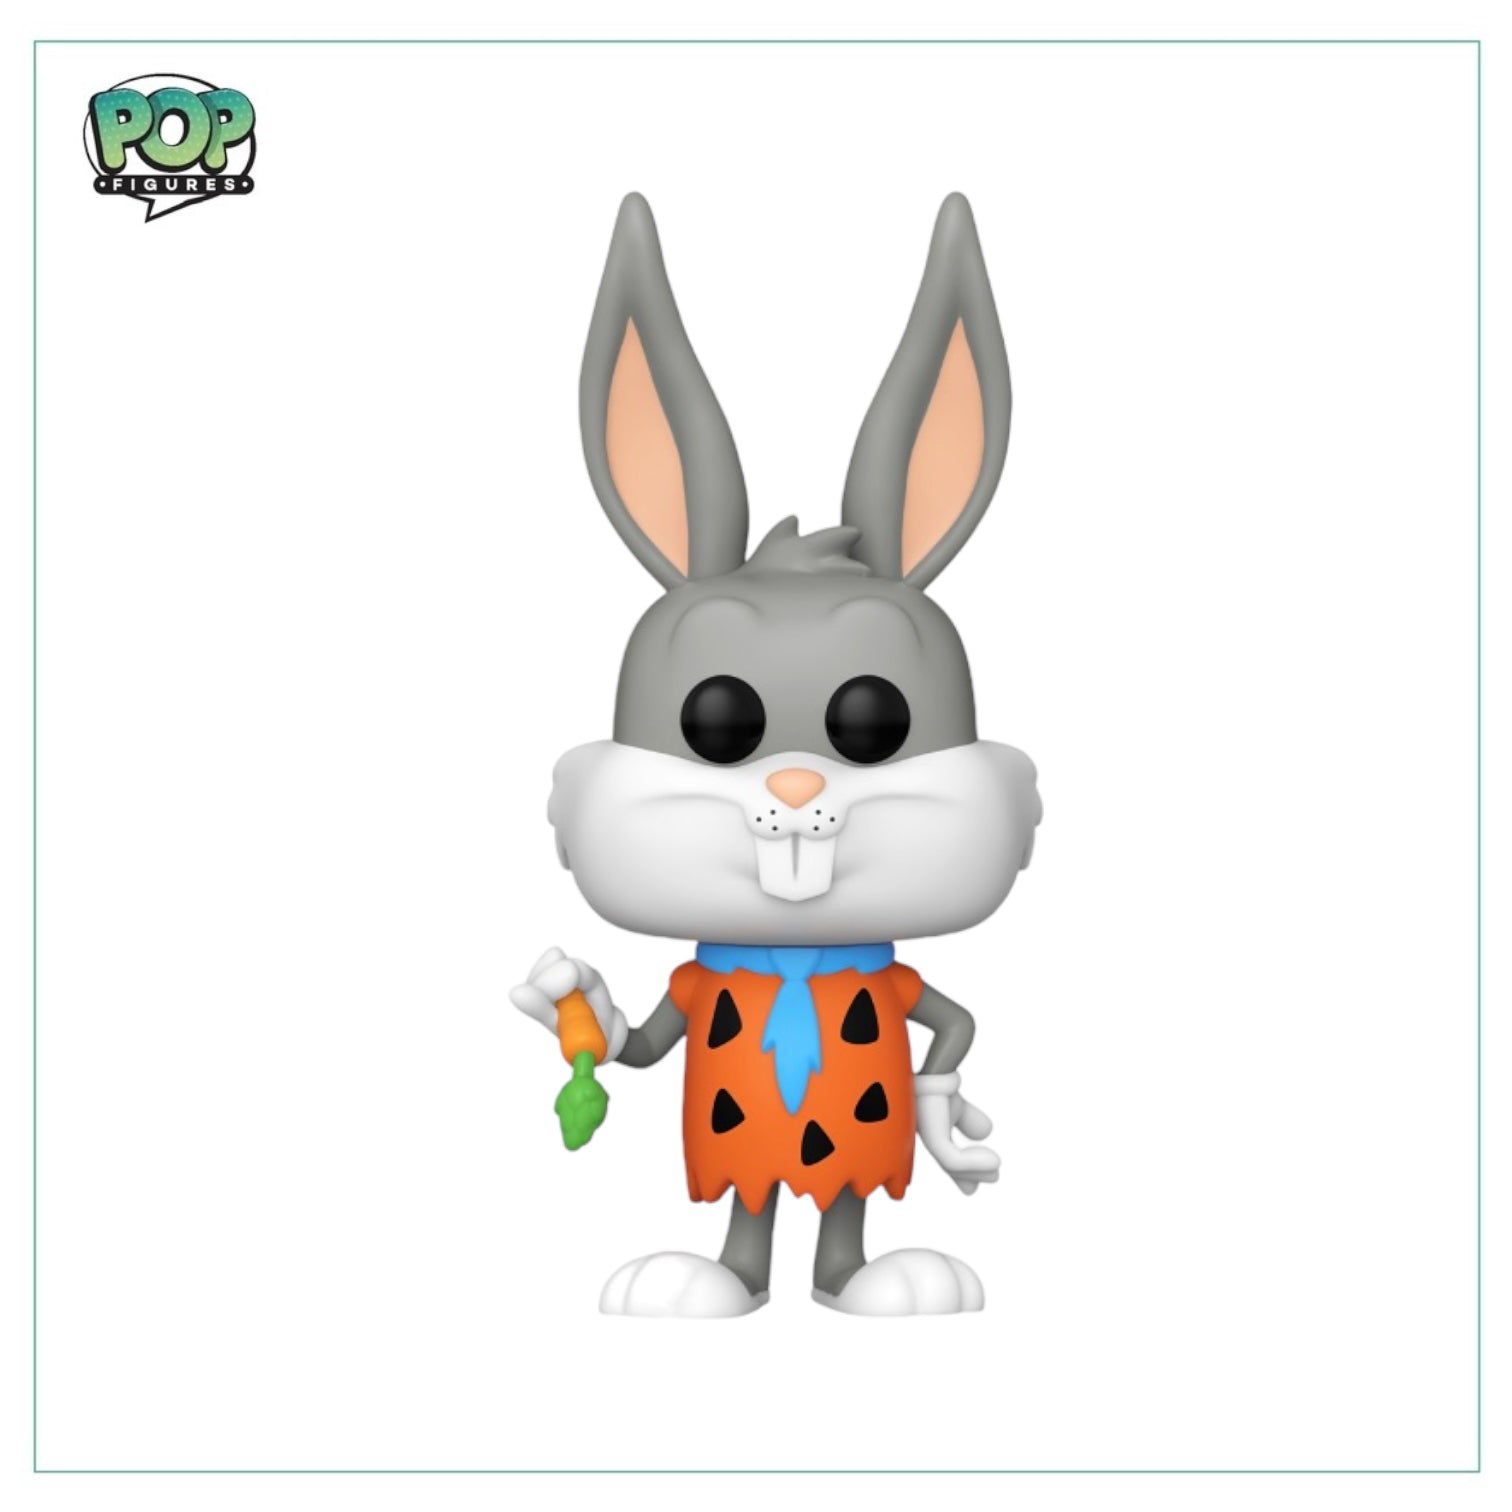 Bugs Bunny as Fred Flintstone #1259 Funko Pop! - Looney Tunes - SDCC / Toy Tokyo 2023 Exclusive